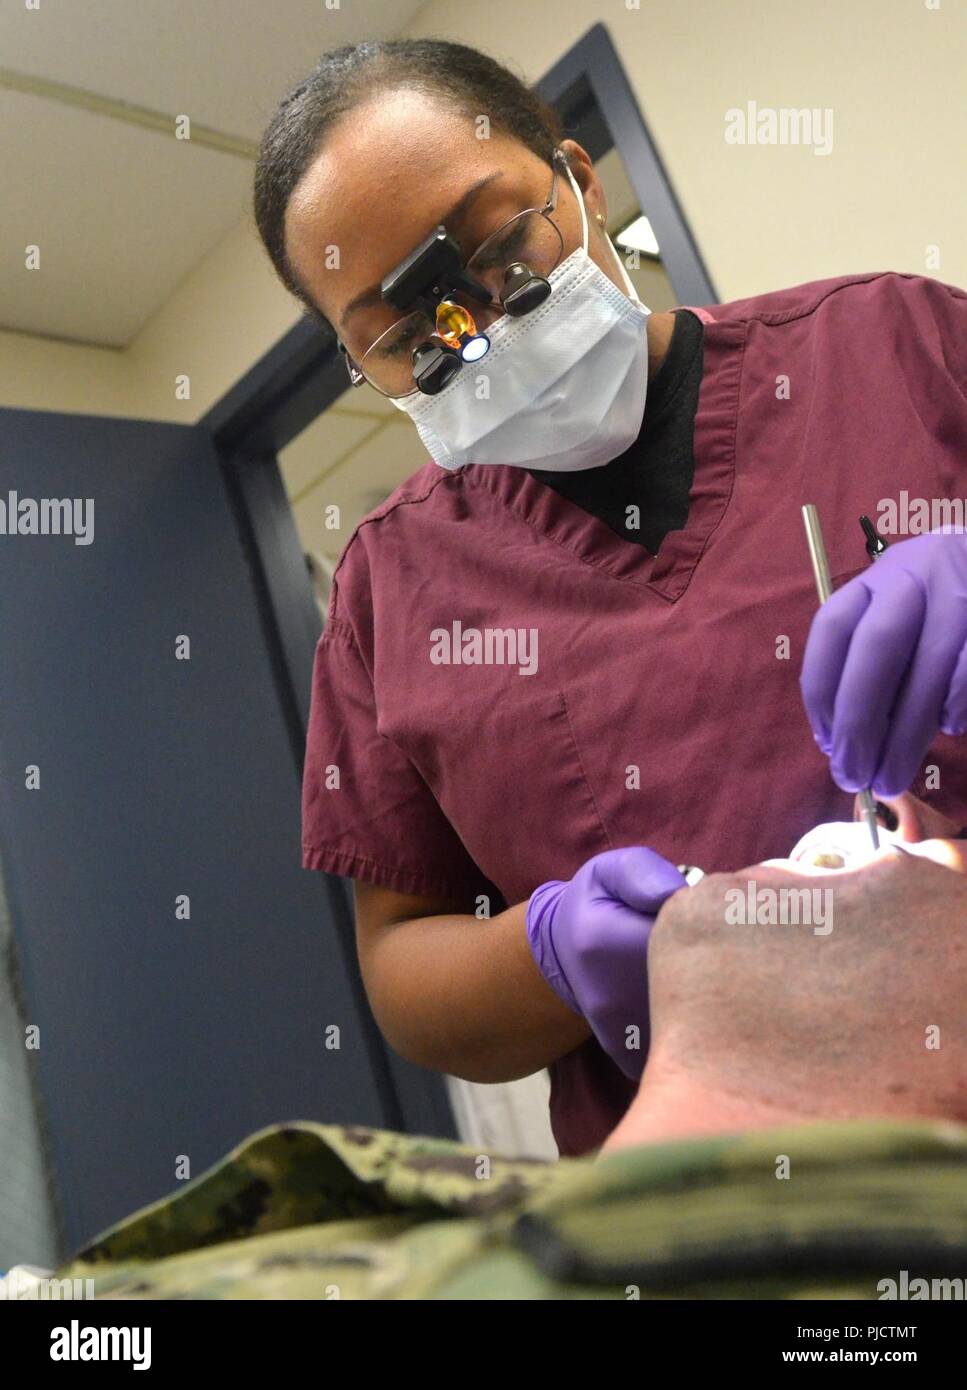 JACKSONVILLE, Fla. (July 24, 2018) Lt. Cmdr. Charlie Cage, a dentist at Naval Branch Health Clinic Jacksonville, conducts an annual exam. Cage, a native of Dominica, British West Indies, says “The Dental Corps plays a vital role in mission readiness. We provide quality dental care which enables the military force to focus on their assigned tasks and it always begins with a dental exam. We always work as a team; a team of dentists, hygienists, assistants, and lab technicians.” The Dental Corps was established in 1912, and a few years later, had an immediate impact during World War I. Stock Photo